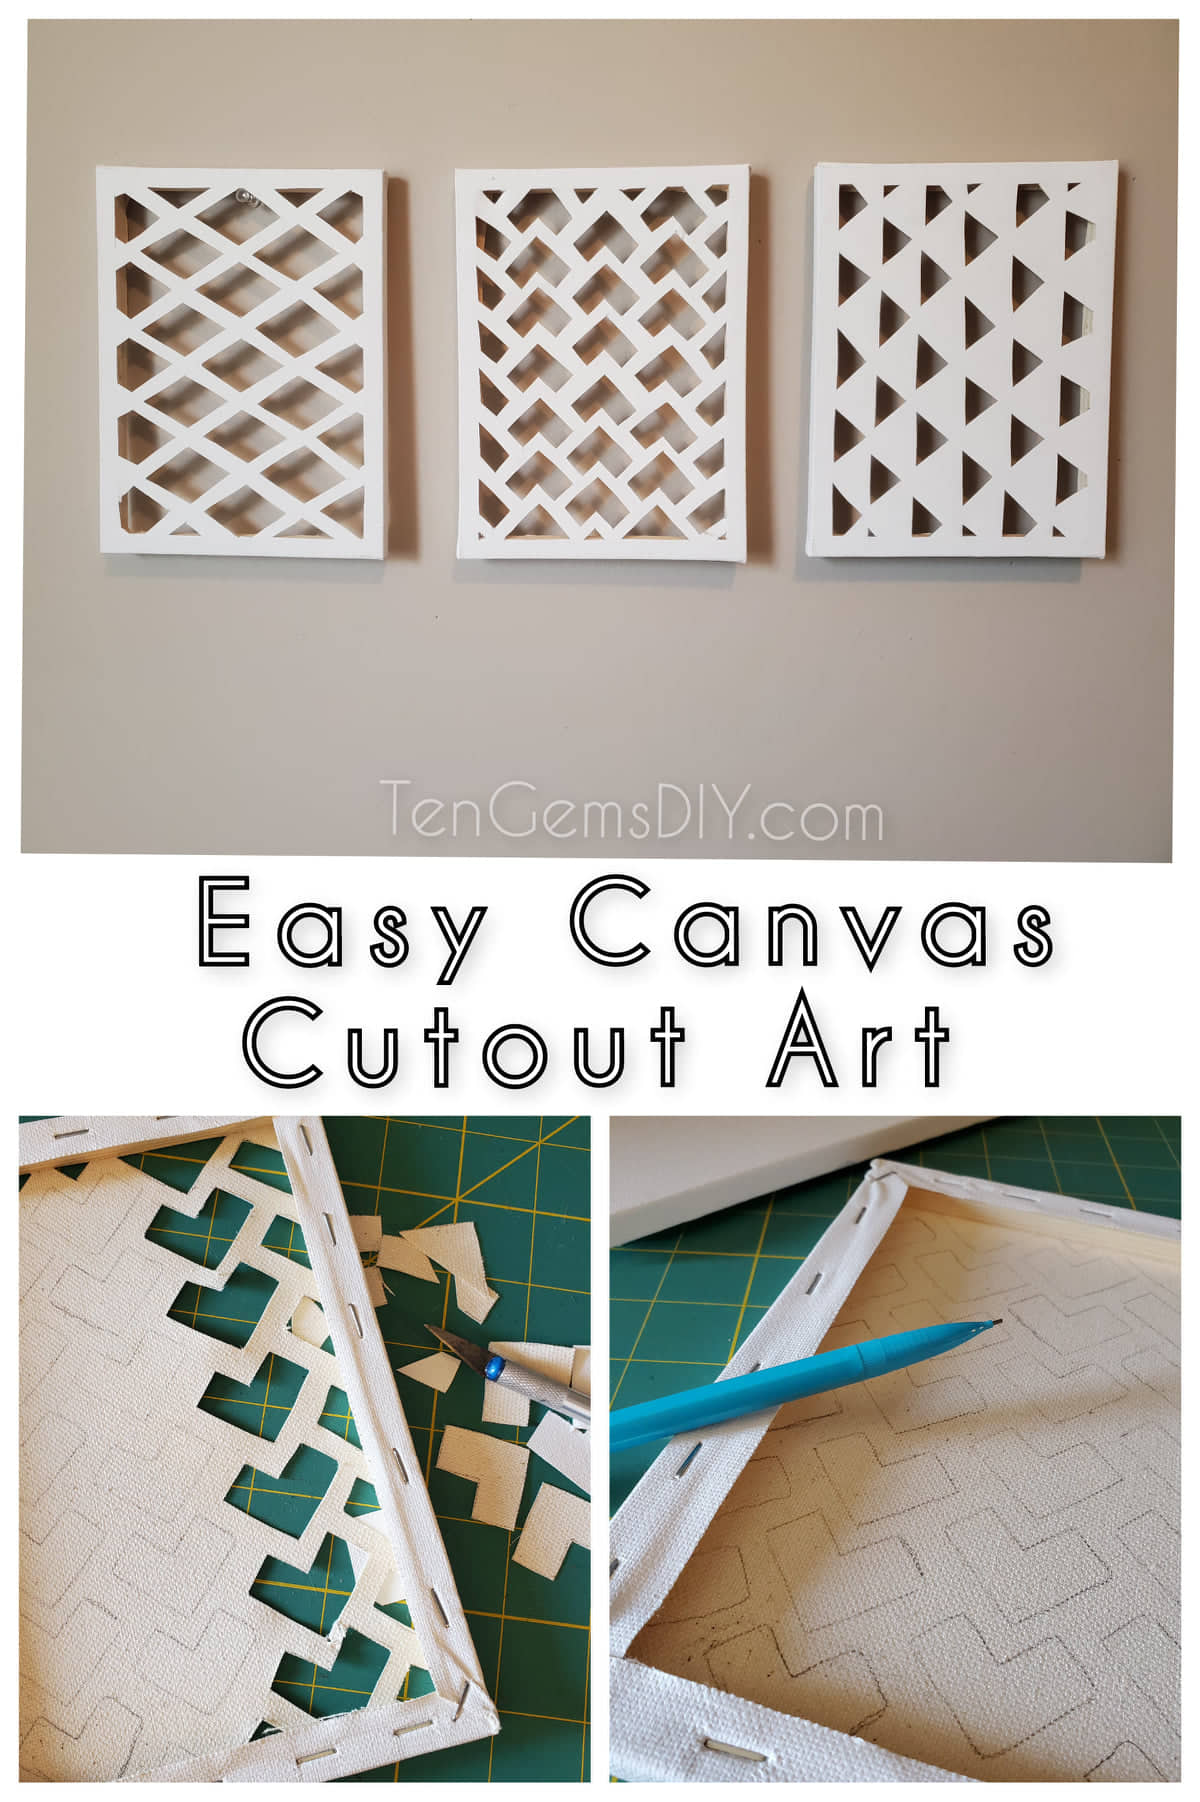 How To Make Easy Canvas Cutout Art